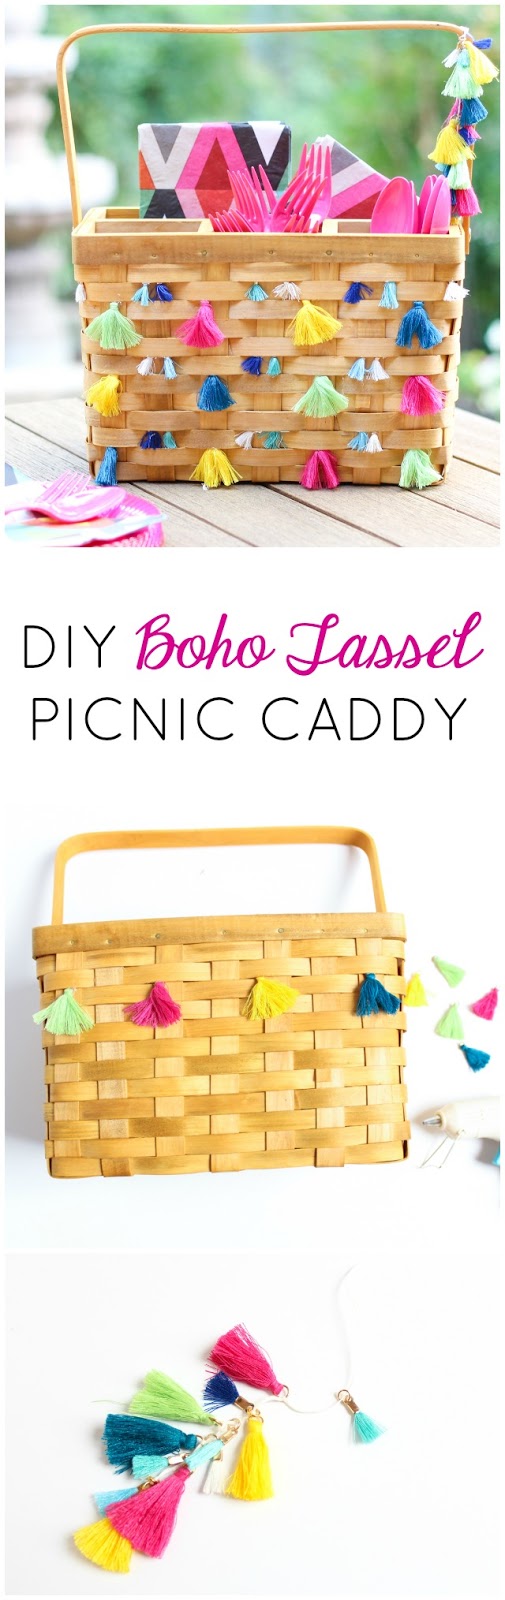 Decorate a basic picnic utensil basket with tassels for boho chic summer entertaining!